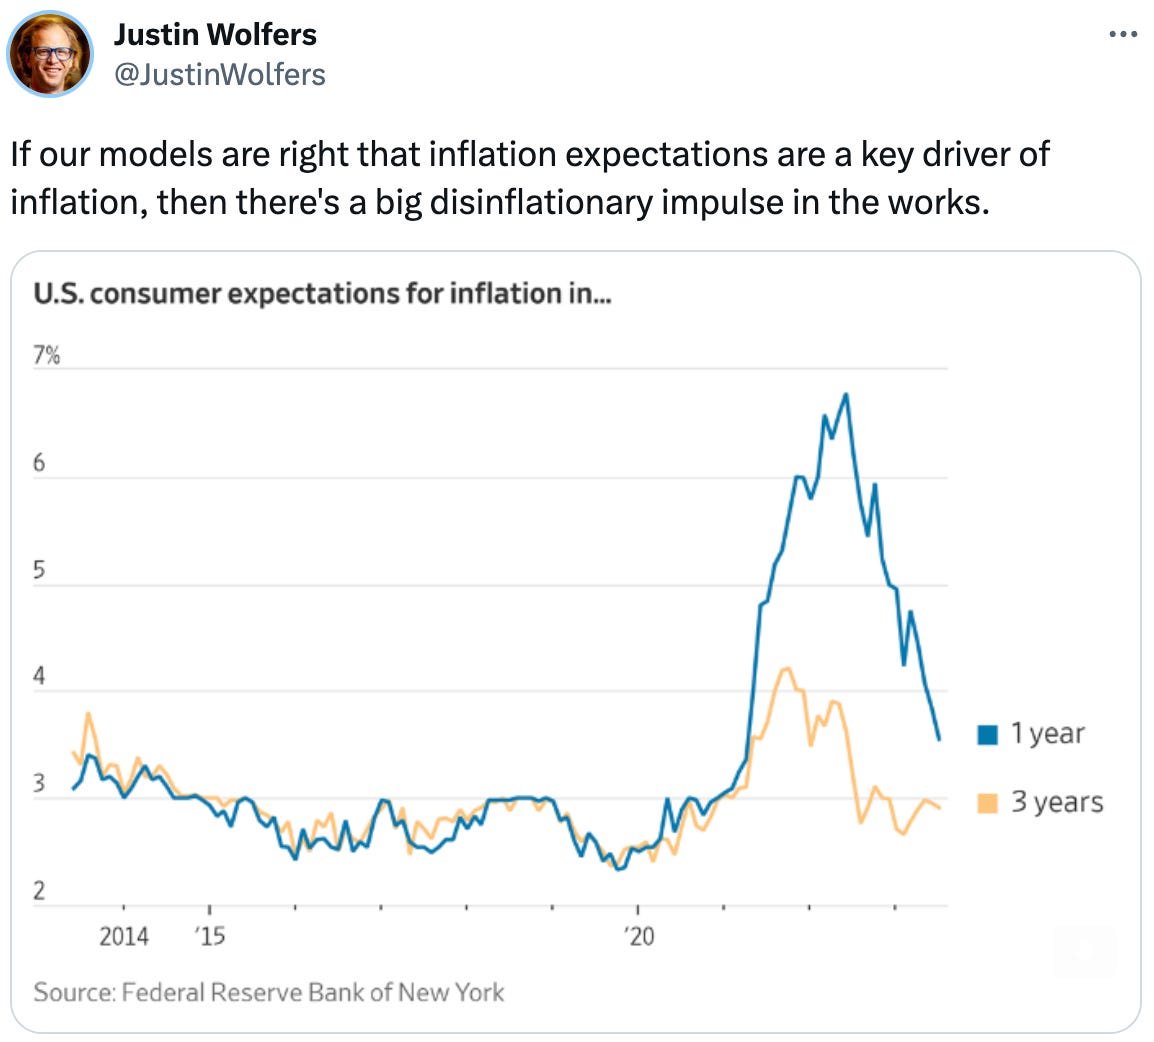  Justin Wolfers @JustinWolfers If our models are right that inflation expectations are a key driver of inflation, then there's a big disinflationary impulse in the works.